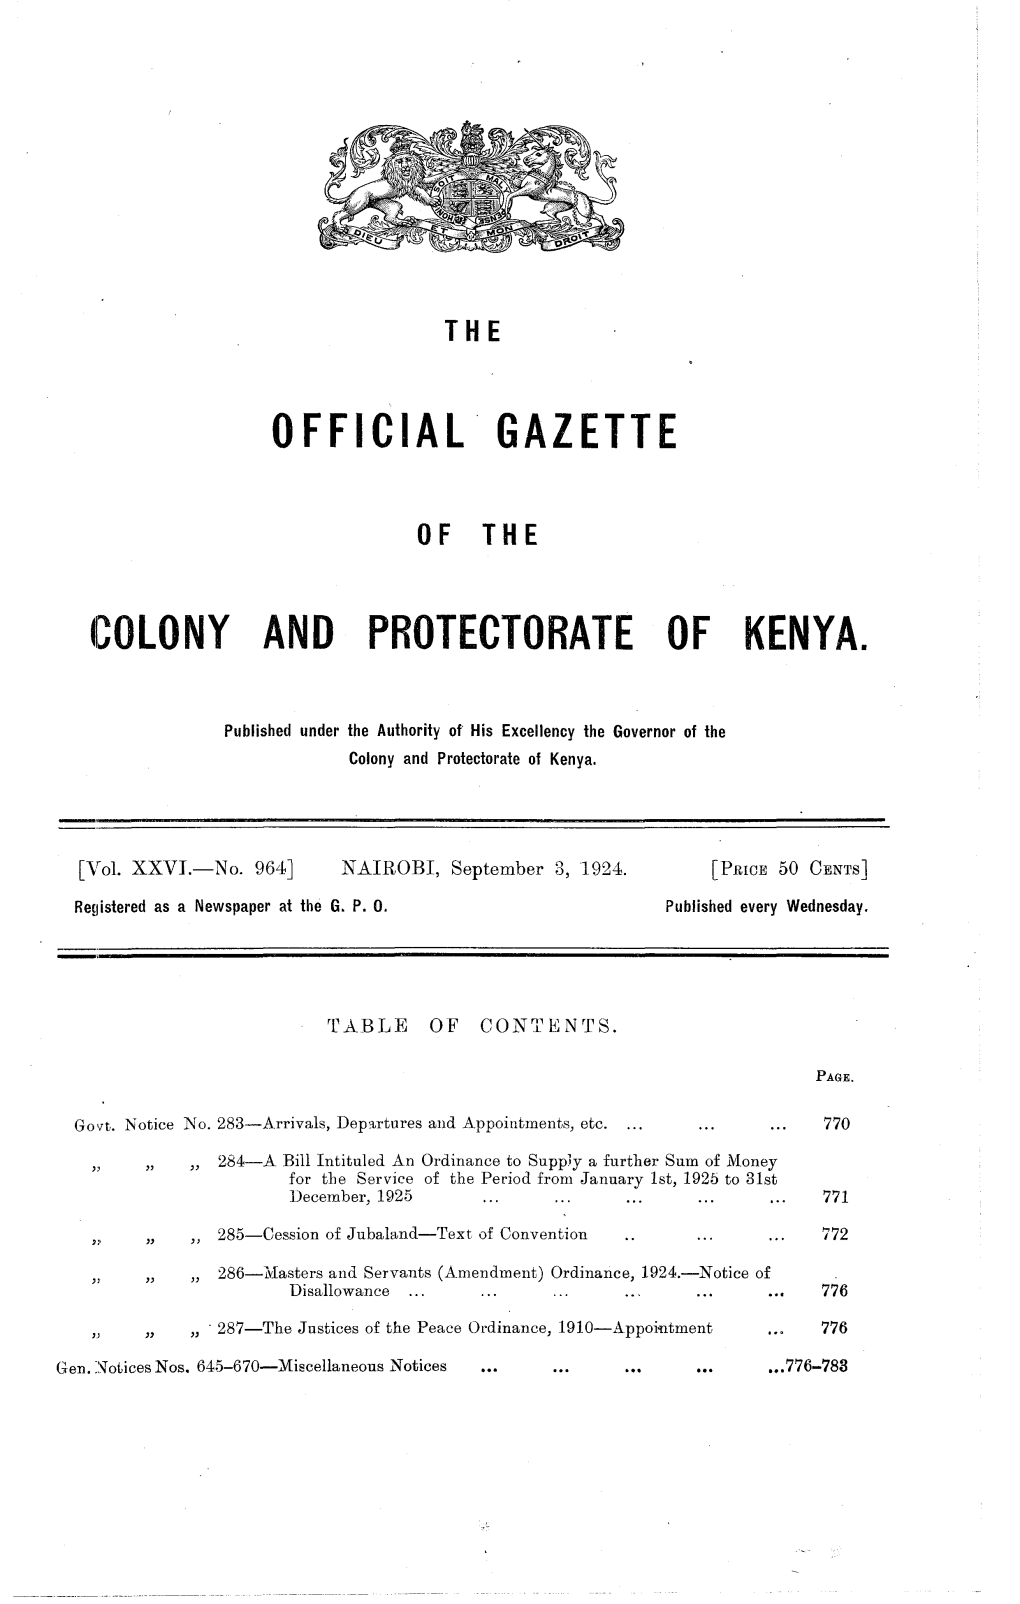 OFFICIAL GAZETTE Lcolony and PROTECTORATE of KENYA